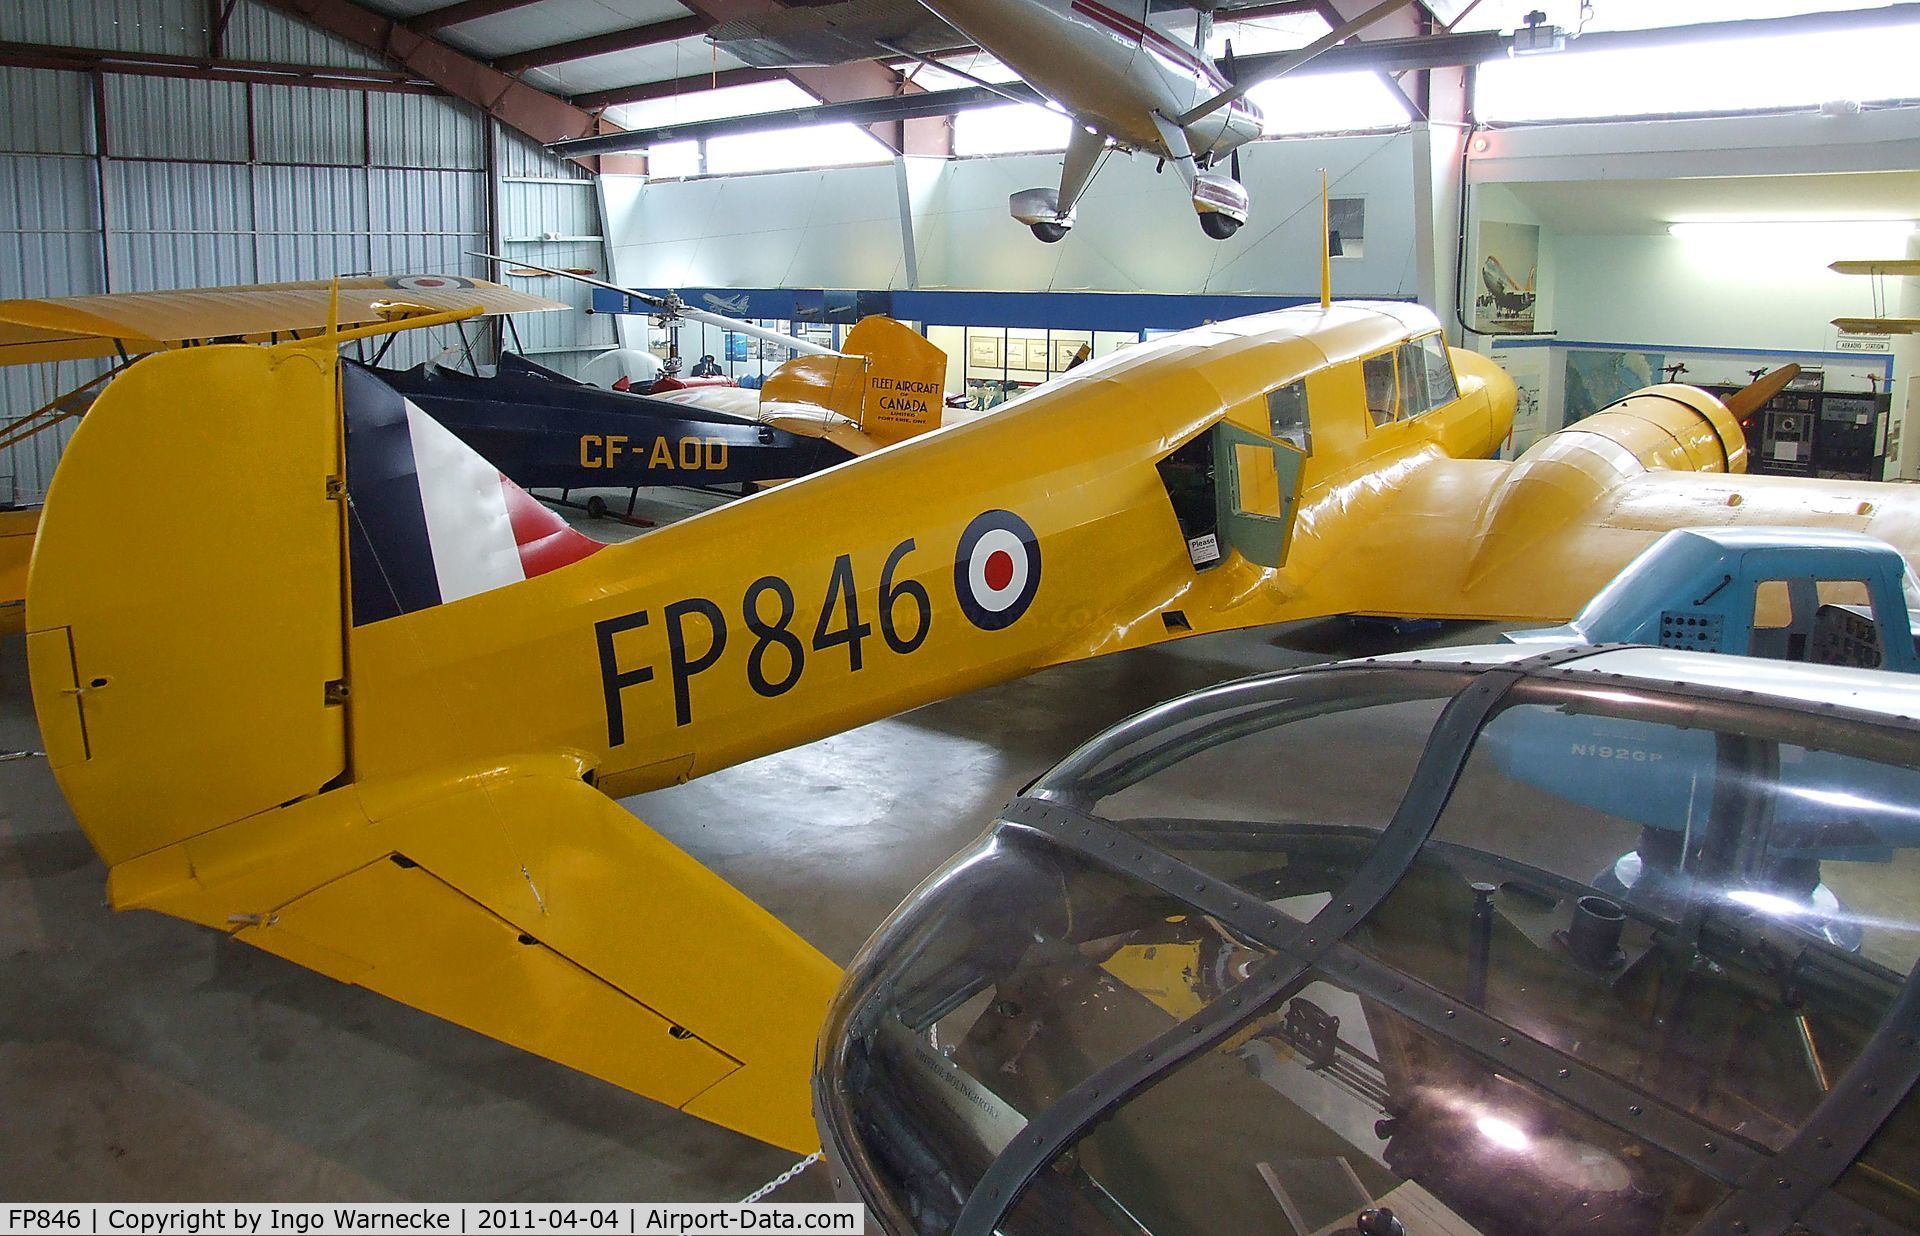 FP846, Avro 652A Anson II C/N Not found FP846, Avro 652A Anson II at the British Columbia Aviation Museum, Sidney BC